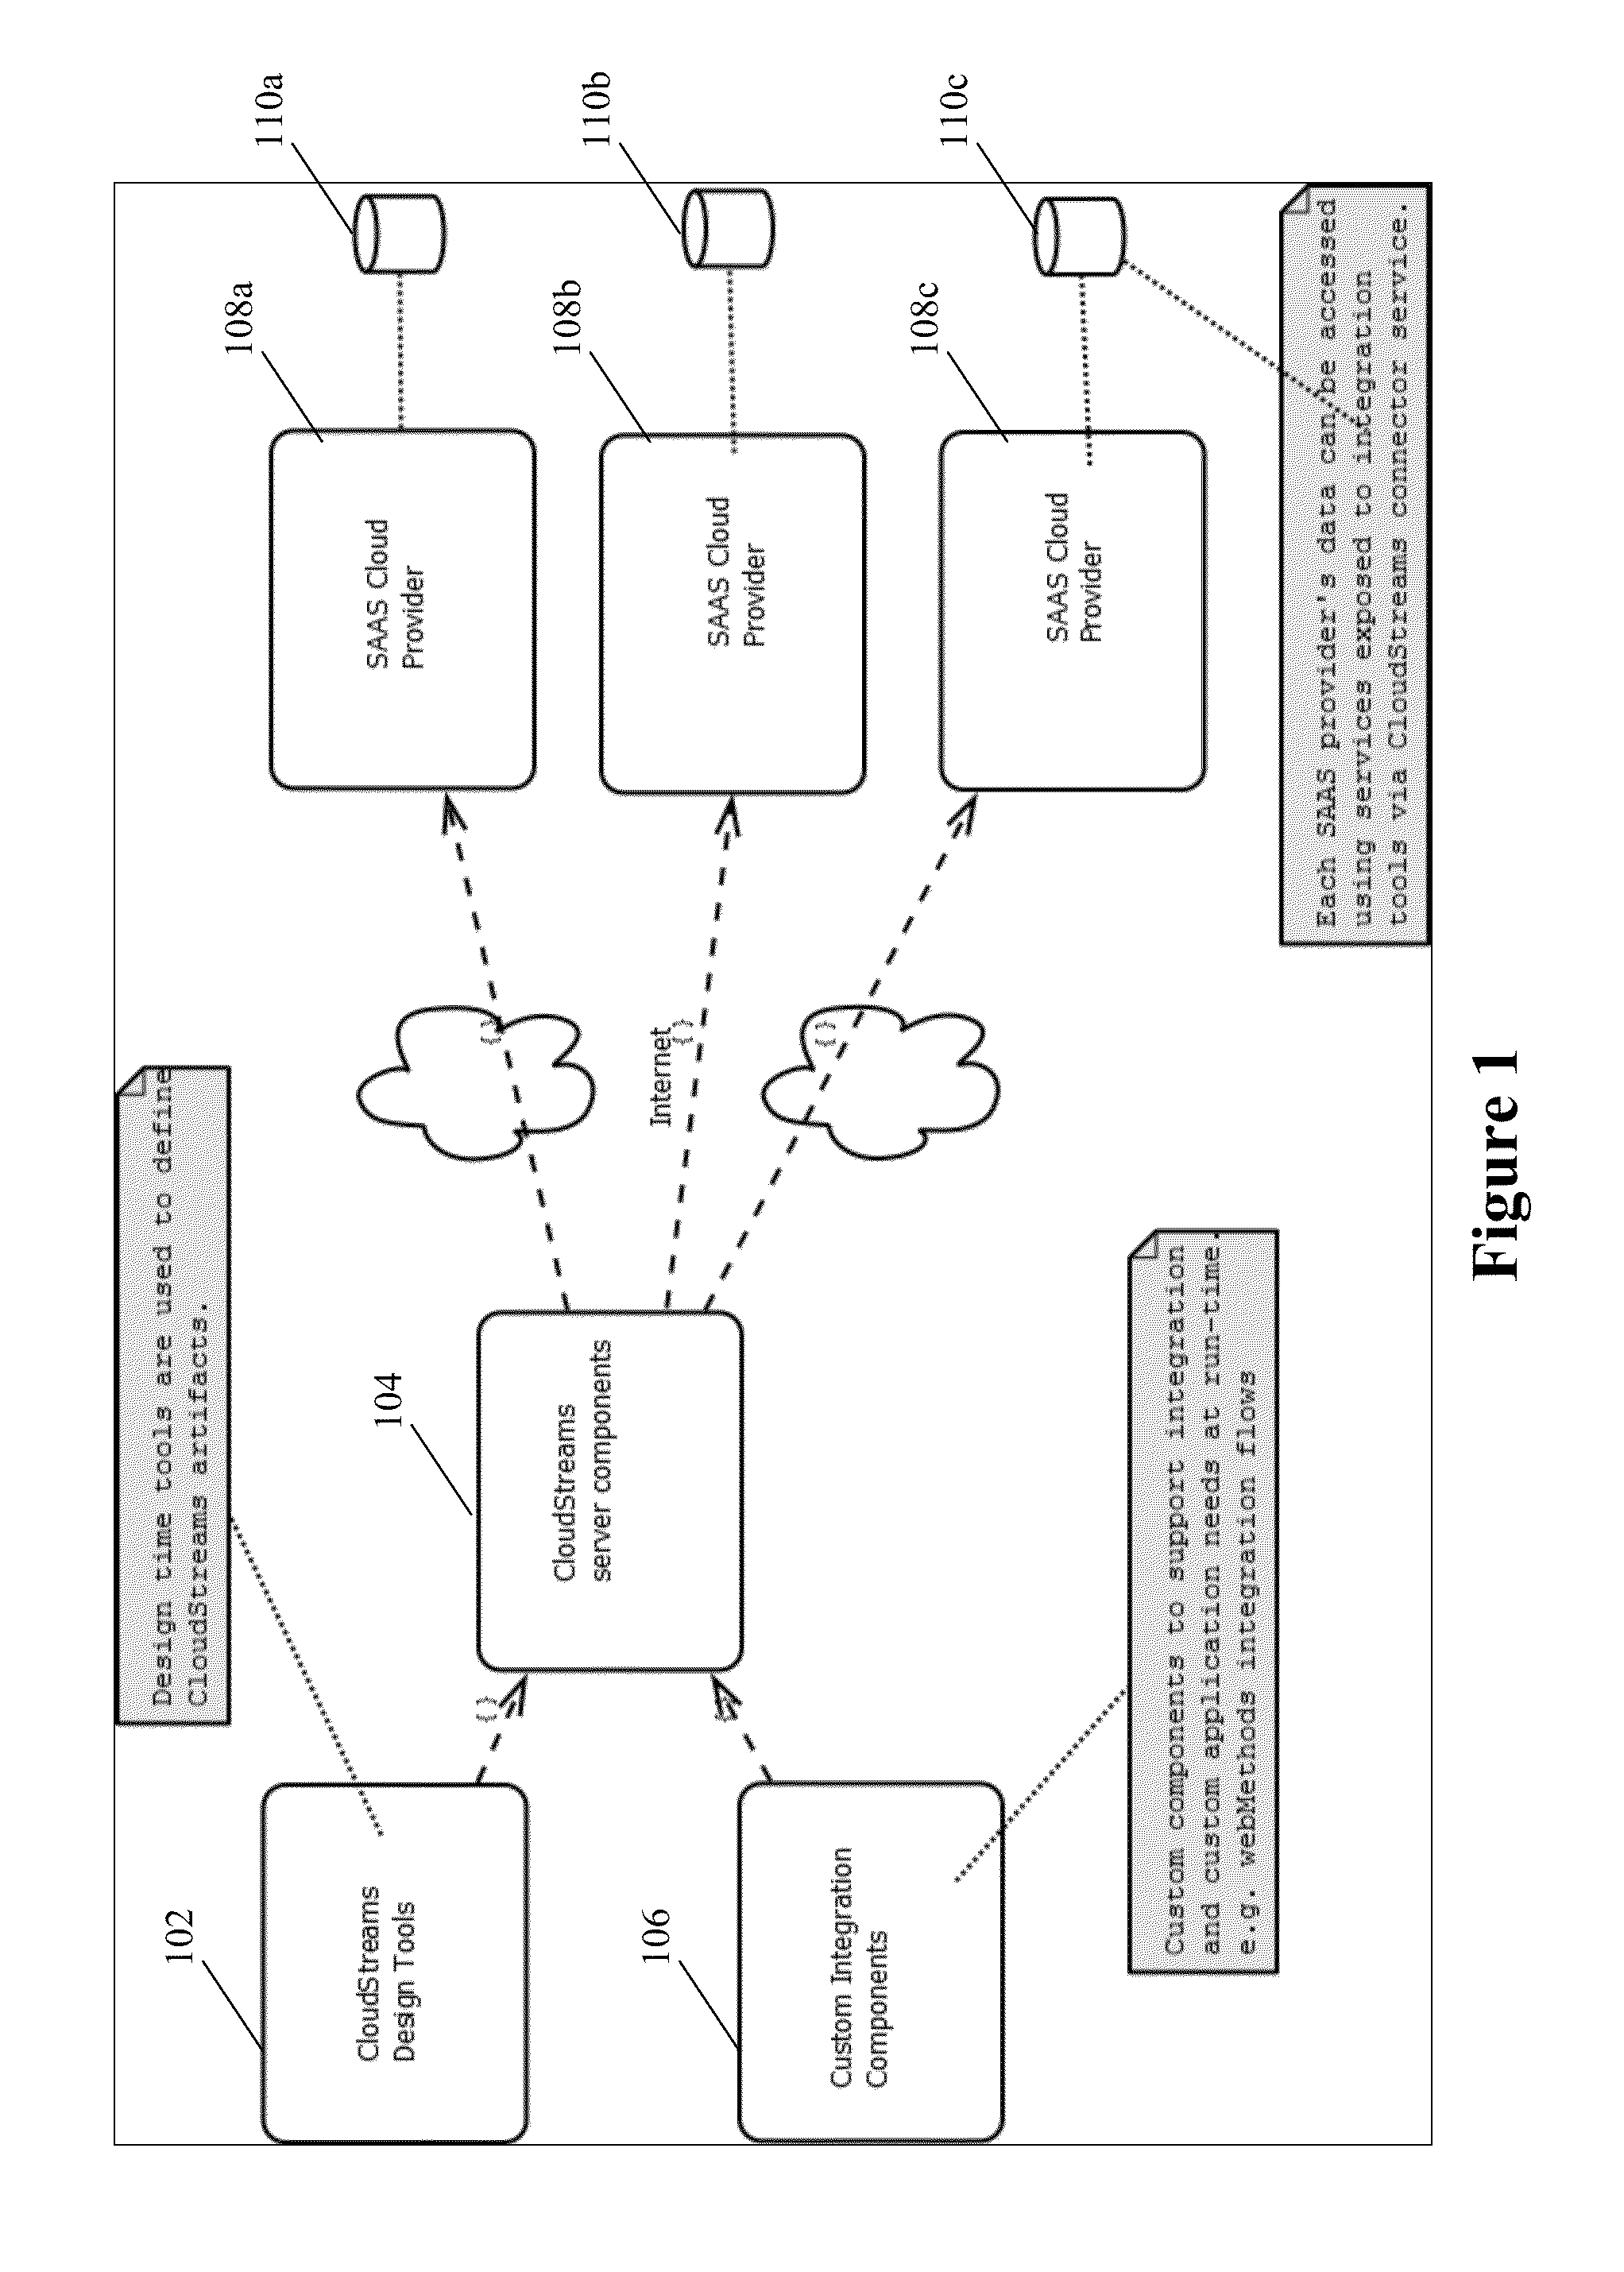 SYSTEMS AND/OR METHODS FOR SUPPORTING A GENERIC FRAMEWORK FOR INTEGRATION OF ON-PREMISES AND SaaS APPLICATIONS WITH SECURITY, SERVICE MEDIATION, ADMINISTRATIVE, AND/OR MONITORING CAPABILITIES